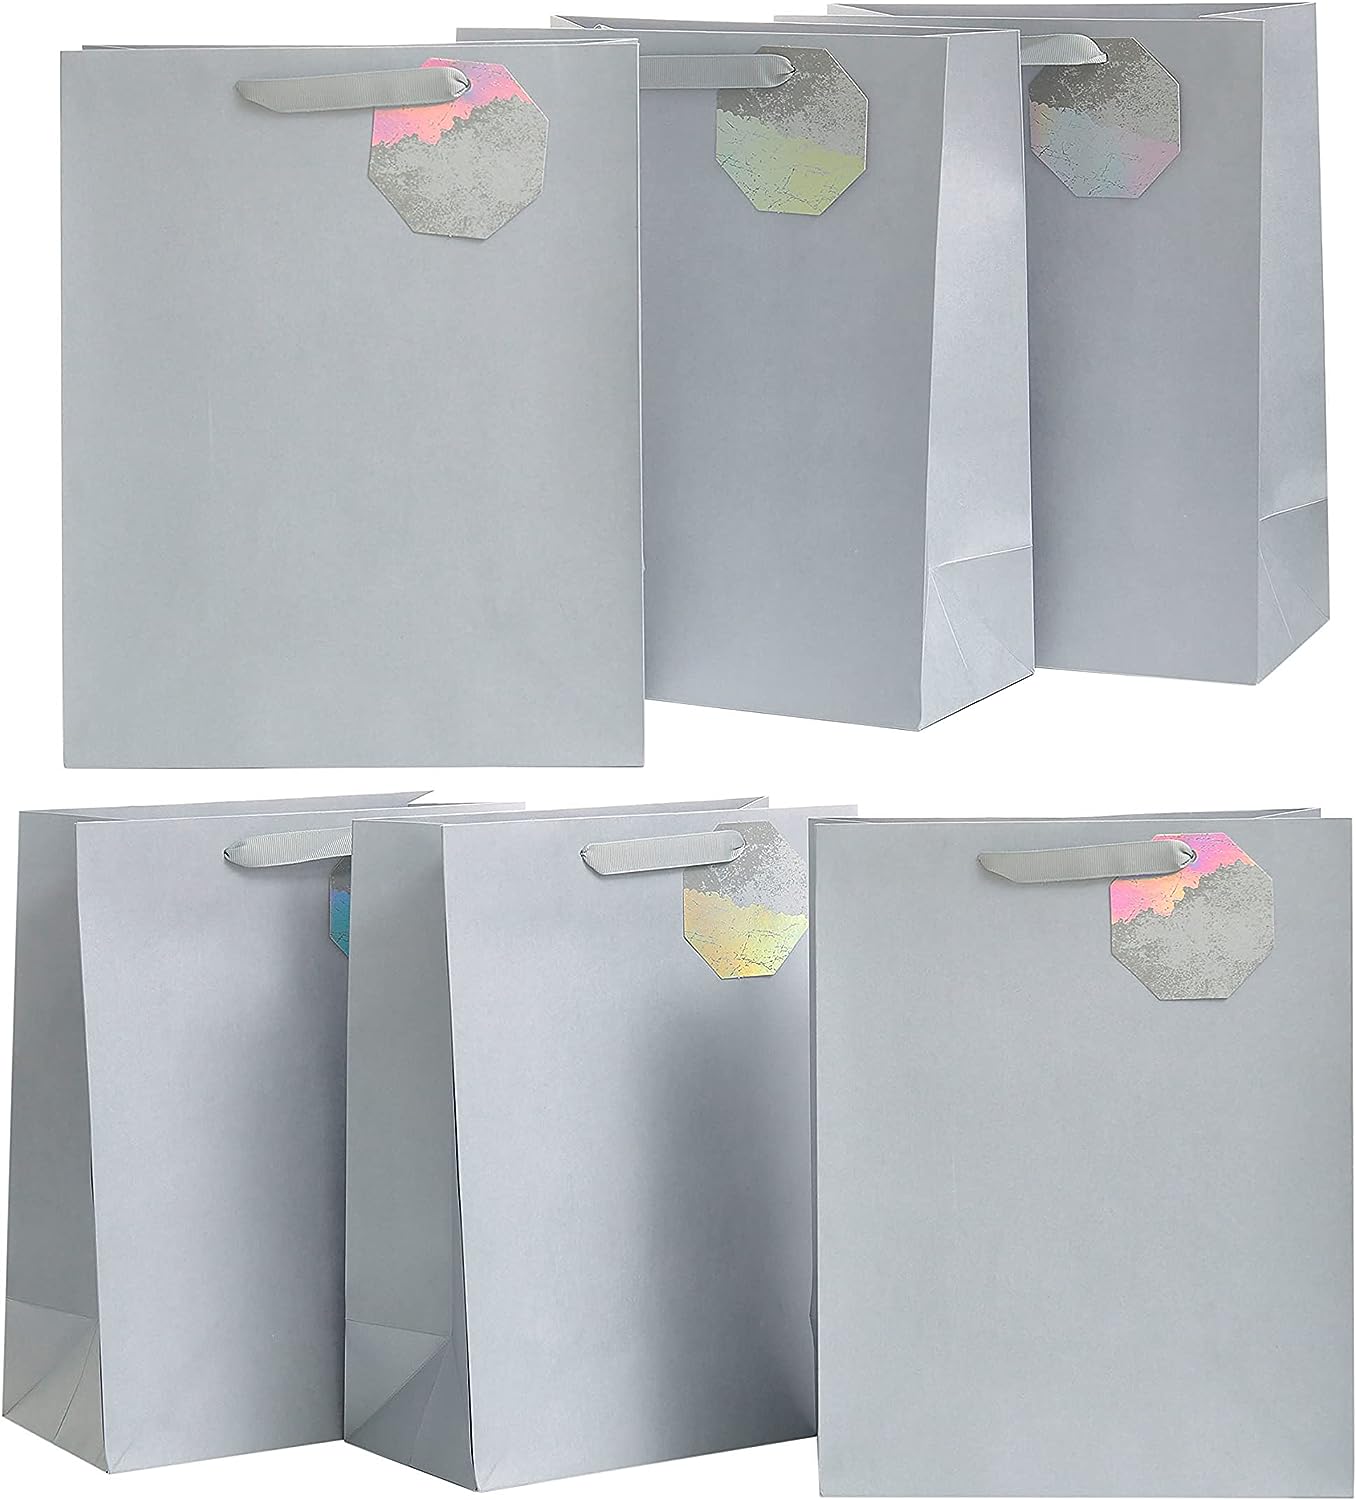 Silver Design Multipack Of 6 Large Gift Bags With Tags For Him/Her/Friend For Father's Day, Birthdays, Thank You, Congratulations or Other Gifts